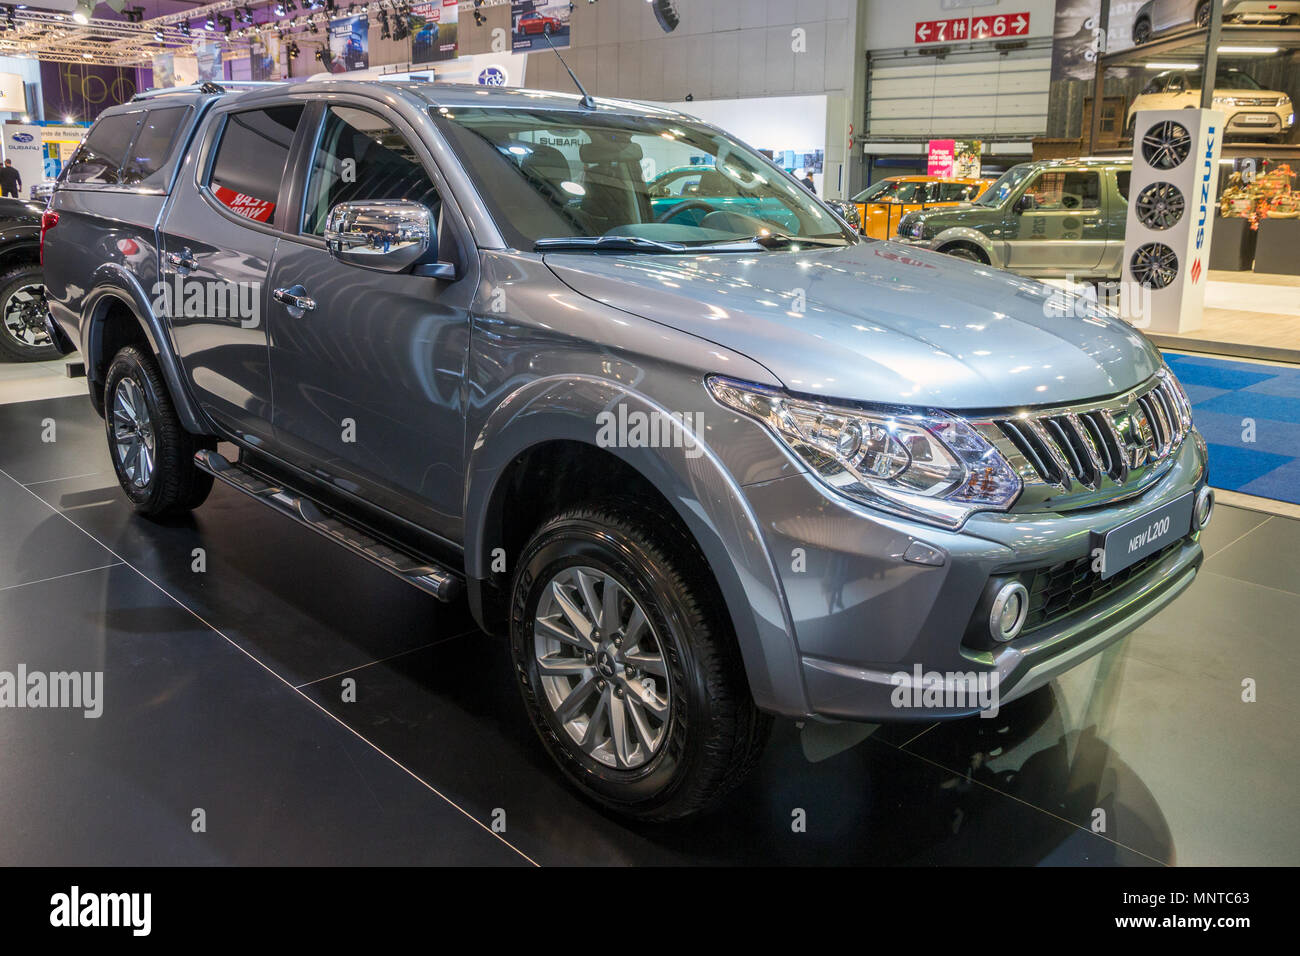 BRUSSELS - JAN 12, 2016: Mitsubishi L200 pickup truck showcased at the Brussels Motor Show. Stock Photo